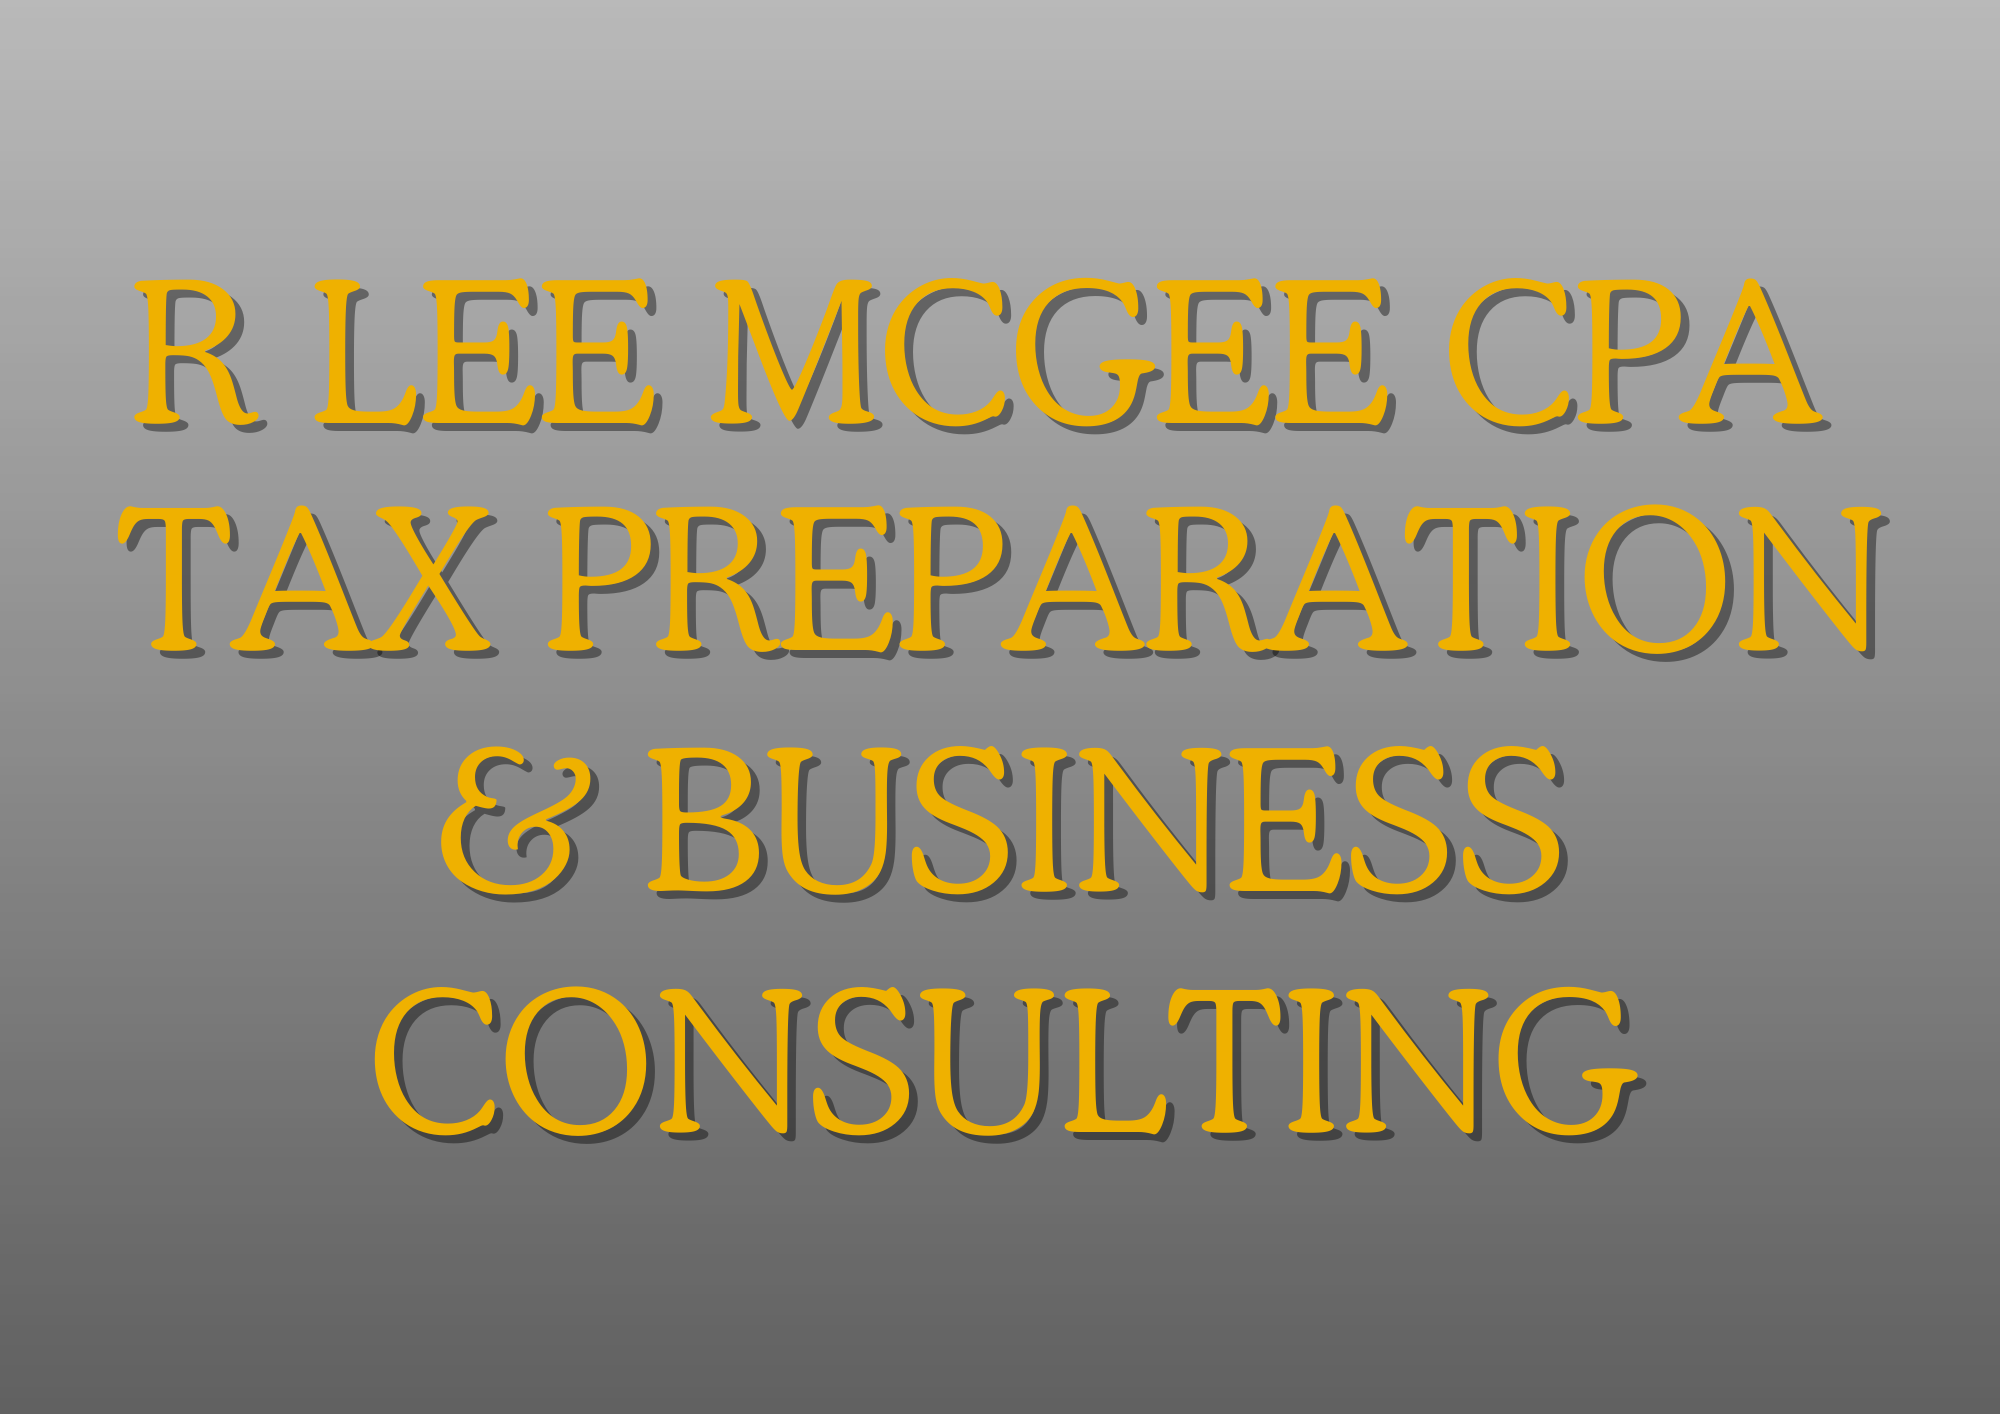 R Lee McGee CPA Tax Preparation & Business Consulting.png